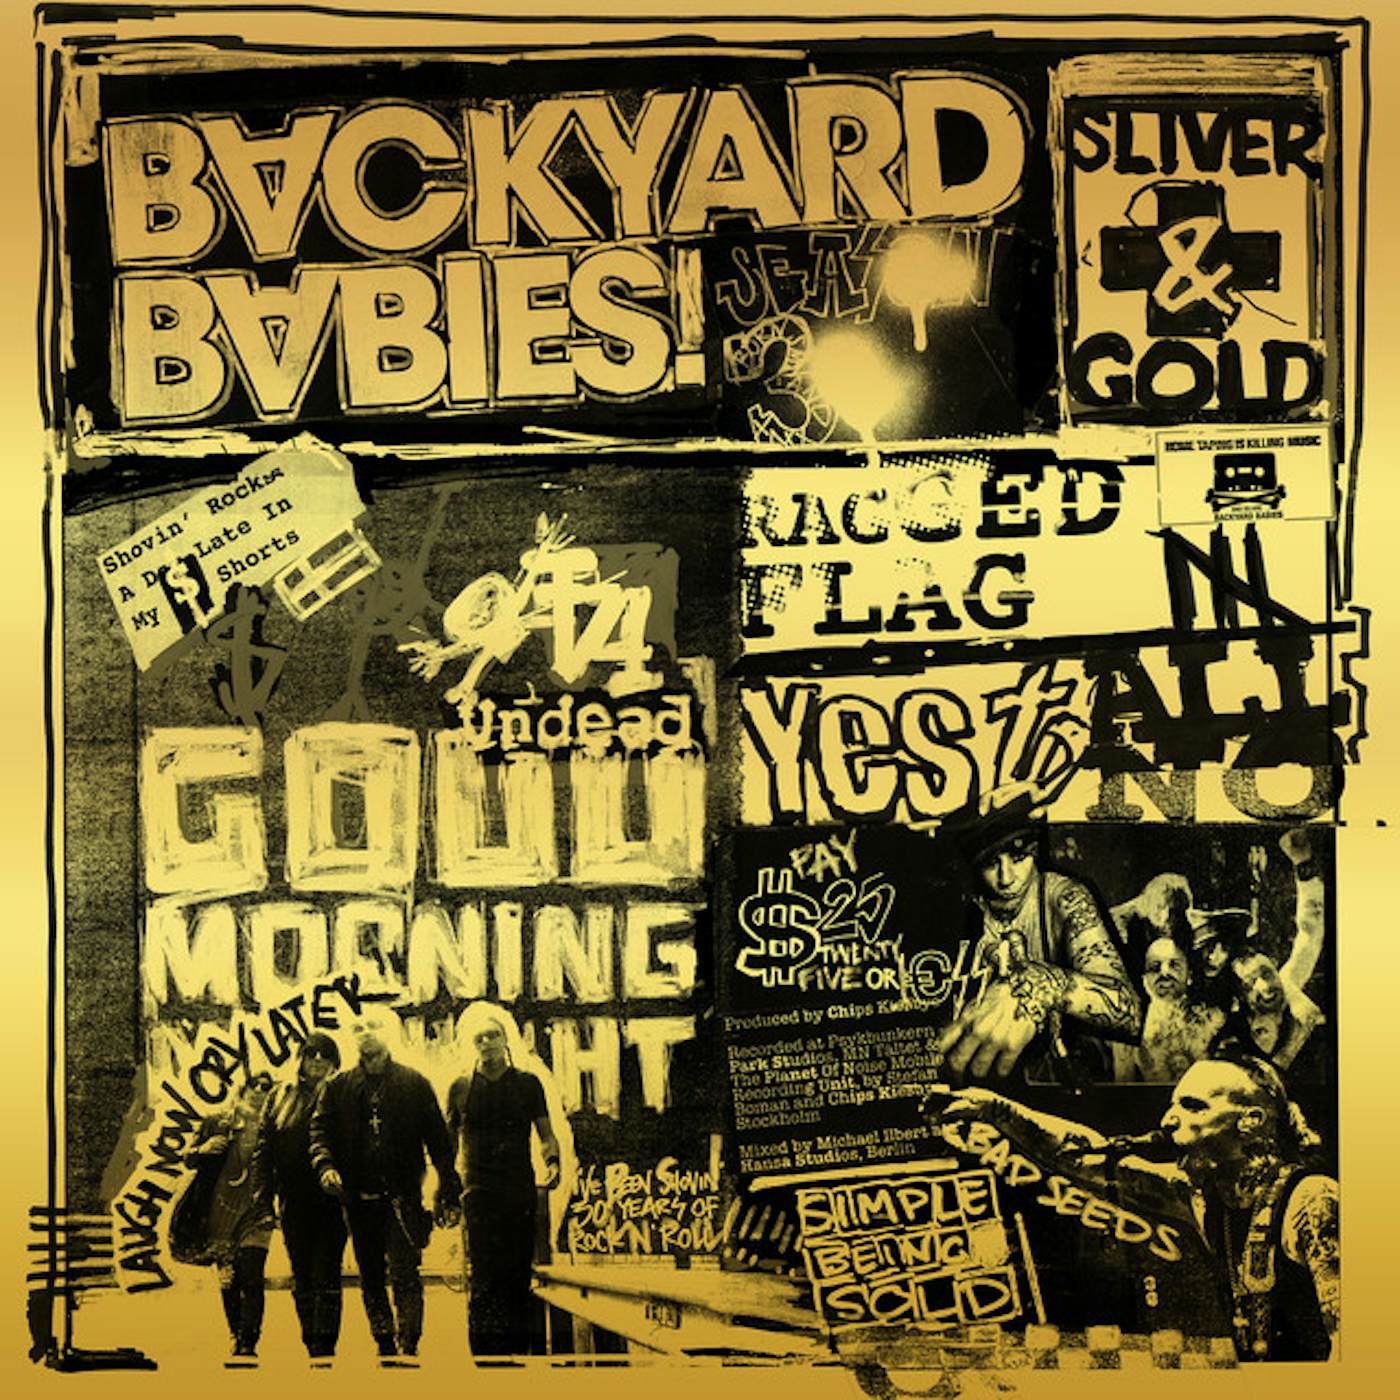 Backyard Babies Sliver And Gold Vinyl Record